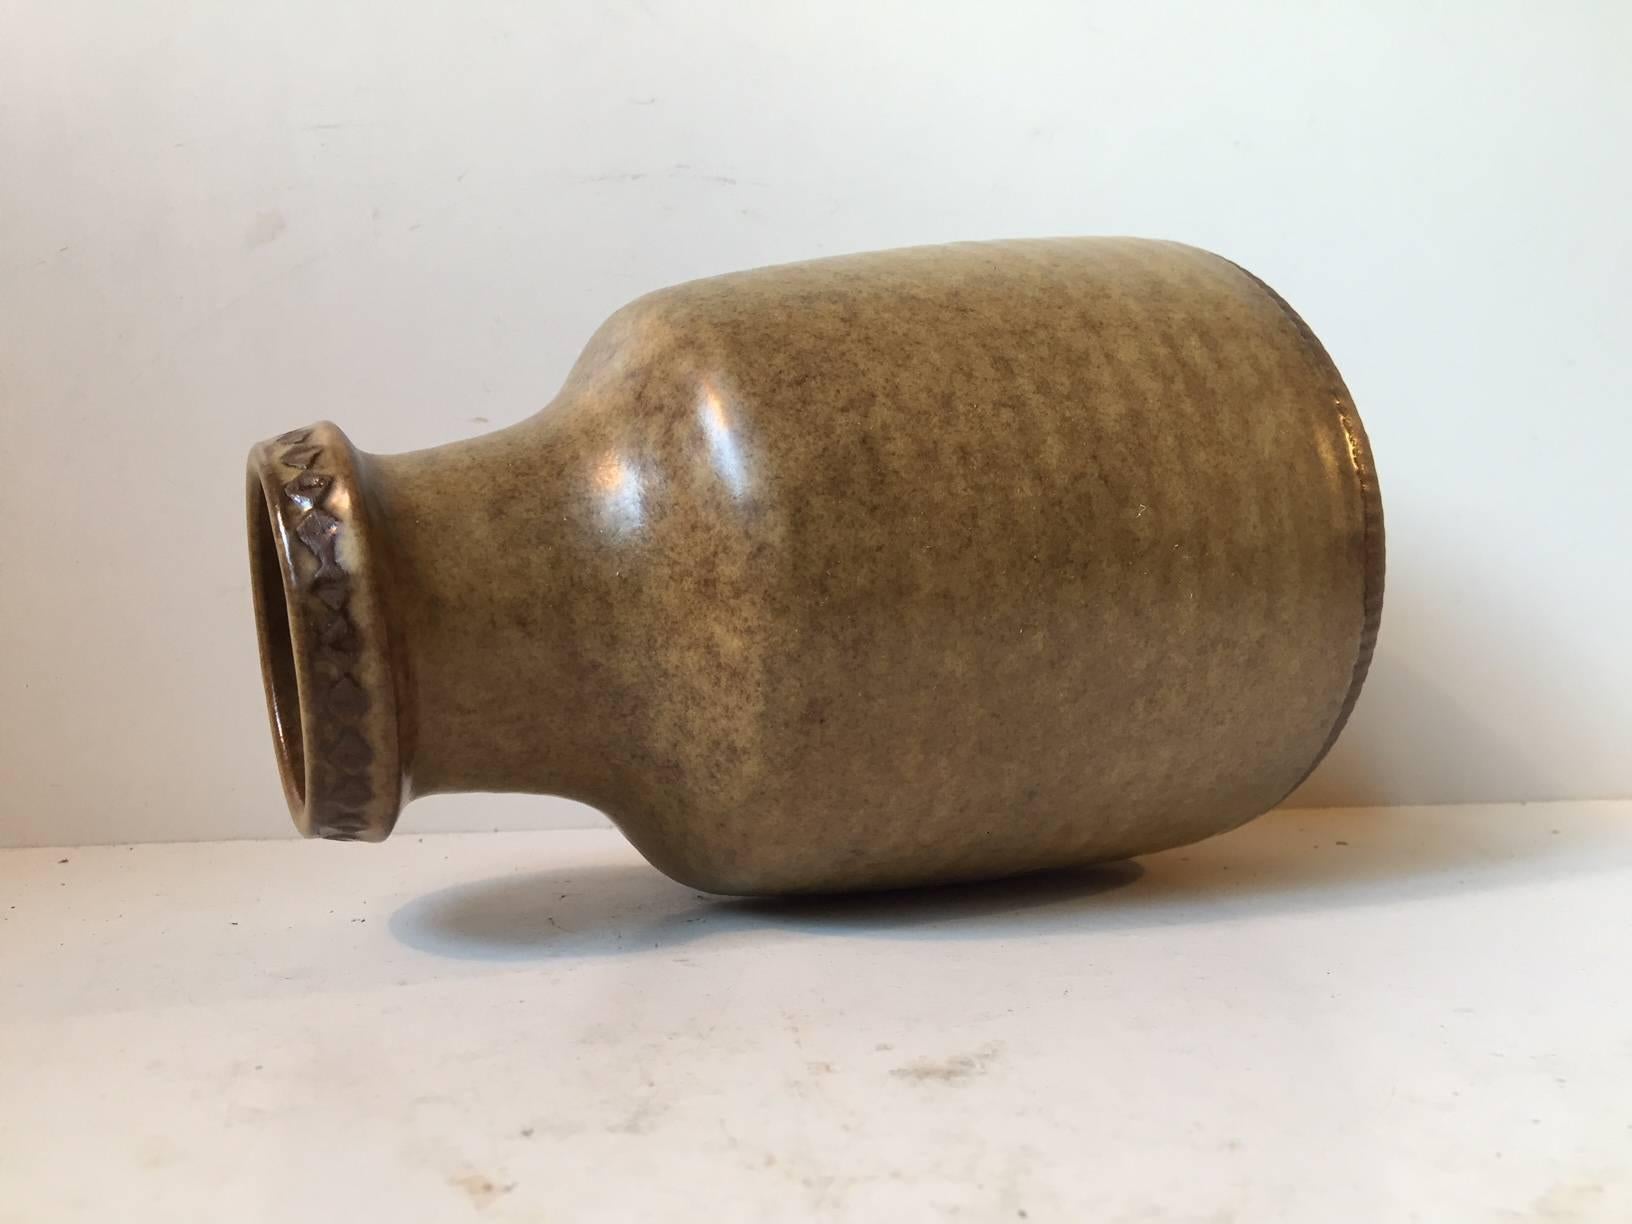 This large ceramic vase in earthy glazes was designed by Swedish Ceramist Gunnar Nylund and manufactured by Rörstrand in the 1960s. The vase is fully signed and stamped by hand on the bottom.